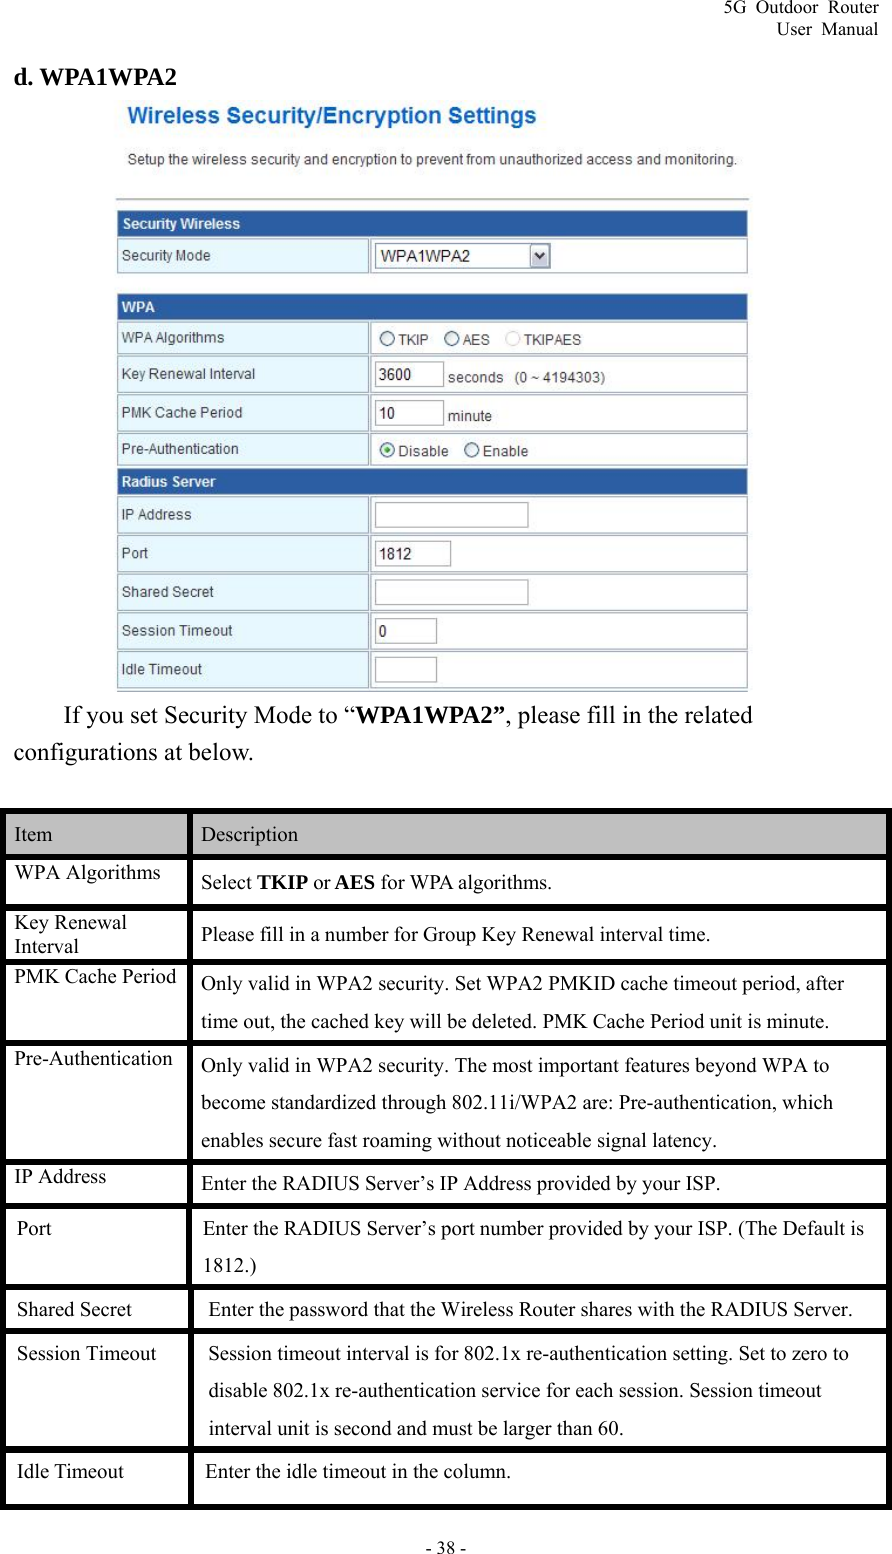 5G Outdoor Router User Manual - 38 - d. WPA1WPA2  If you set Security Mode to “WPA1WPA2”, please fill in the related configurations at below.  Item   Description  WPA Algorithms  Select TKIP or AES for WPA algorithms. Key Renewal Interval  Please fill in a number for Group Key Renewal interval time. PMK Cache Period Only valid in WPA2 security. Set WPA2 PMKID cache timeout period, after time out, the cached key will be deleted. PMK Cache Period unit is minute. Pre-Authentication Only valid in WPA2 security. The most important features beyond WPA to become standardized through 802.11i/WPA2 are: Pre-authentication, which enables secure fast roaming without noticeable signal latency. IP Address Enter the RADIUS Server’s IP Address provided by your ISP.  Port  Enter the RADIUS Server’s port number provided by your ISP. (The Default is 1812.)  Shared Secret  Enter the password that the Wireless Router shares with the RADIUS Server.  Session Timeout  Session timeout interval is for 802.1x re-authentication setting. Set to zero to disable 802.1x re-authentication service for each session. Session timeout interval unit is second and must be larger than 60.  Idle Timeout  Enter the idle timeout in the column. 